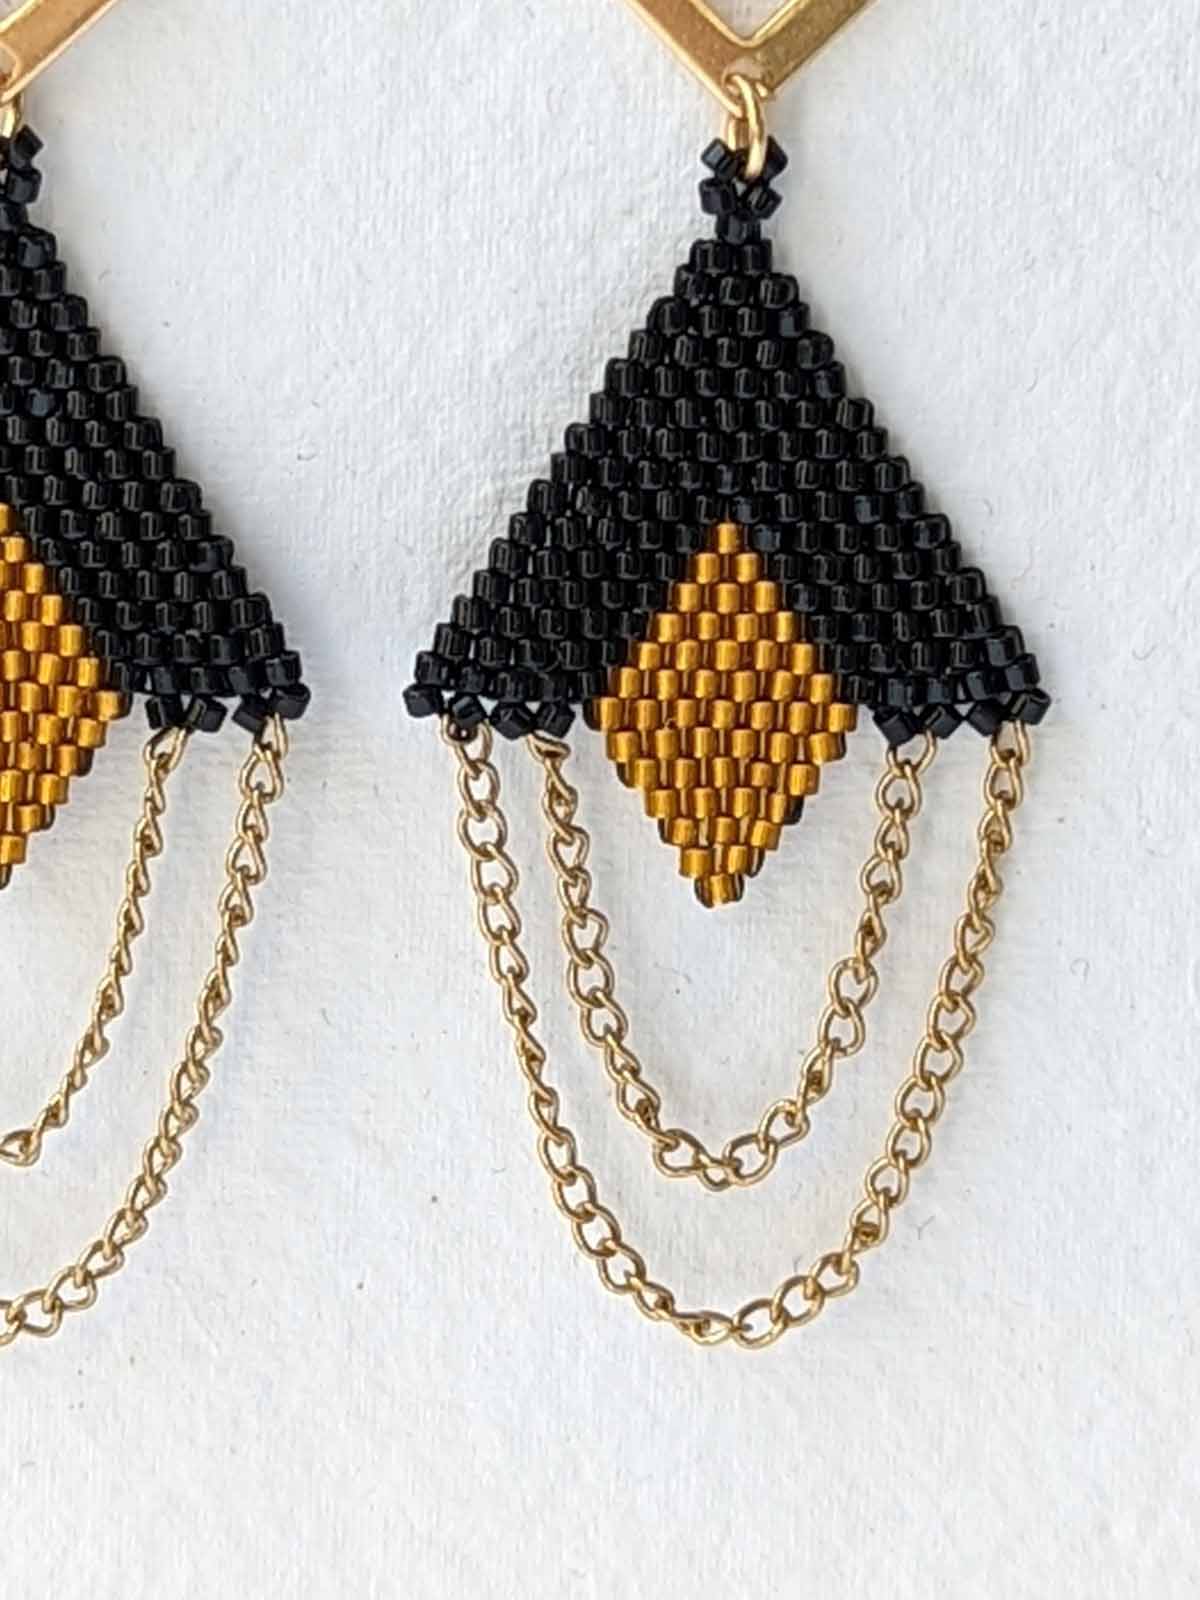 Inverted Triangle with Chain accents handmade beaded earrings